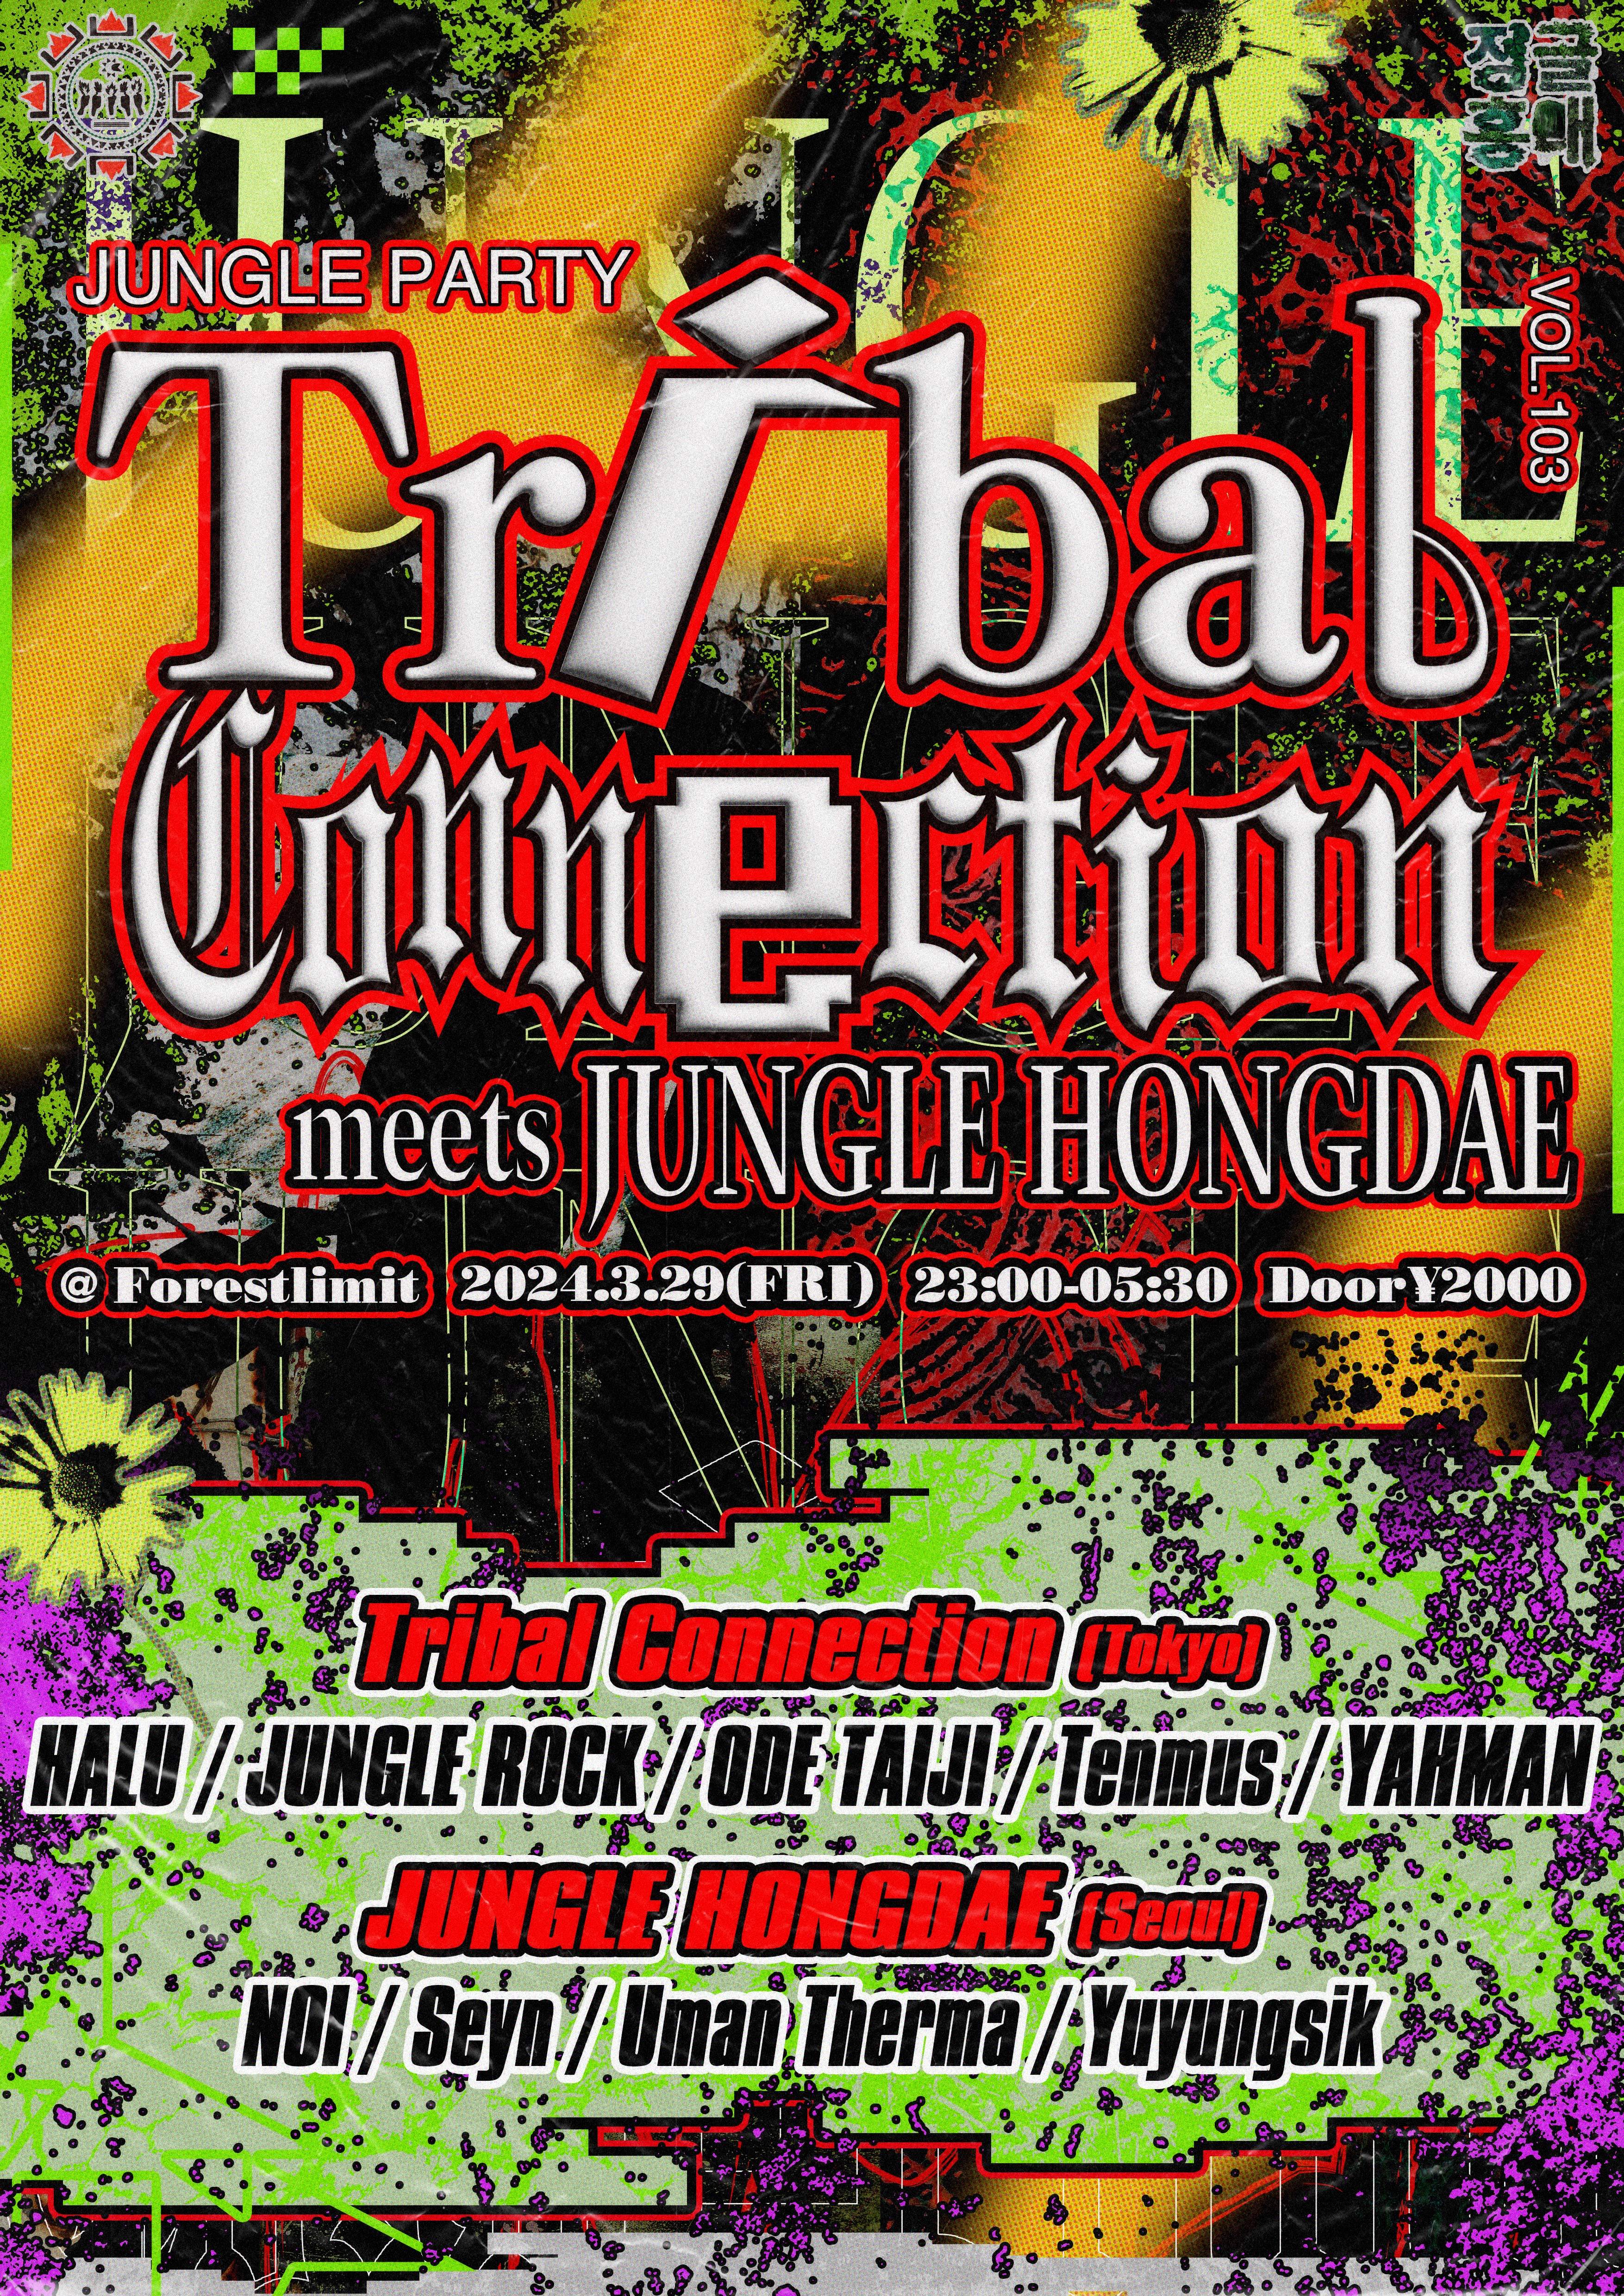 Jungle Party Tribal Connection VOL.103 meets JUNGLE HONGDAE(Seoul) - フライヤー表